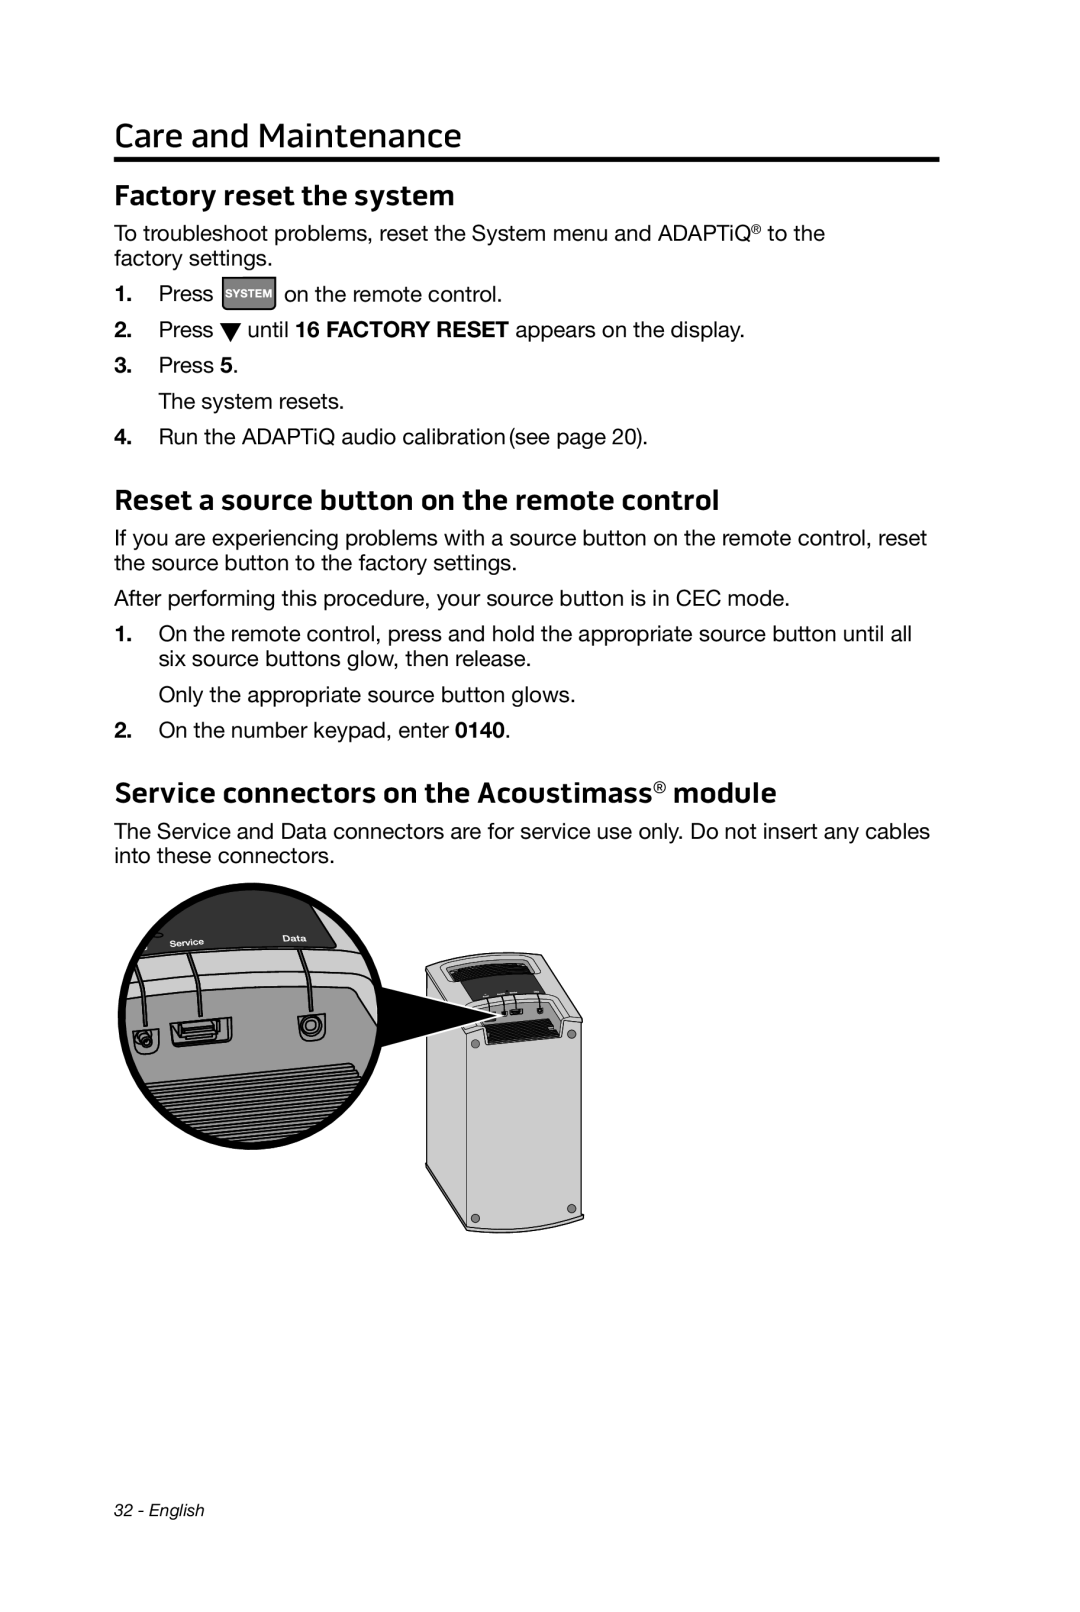 Bose cinemate manual Factory reset the system, Reset a source button on the remote control, Care and Maintenance 